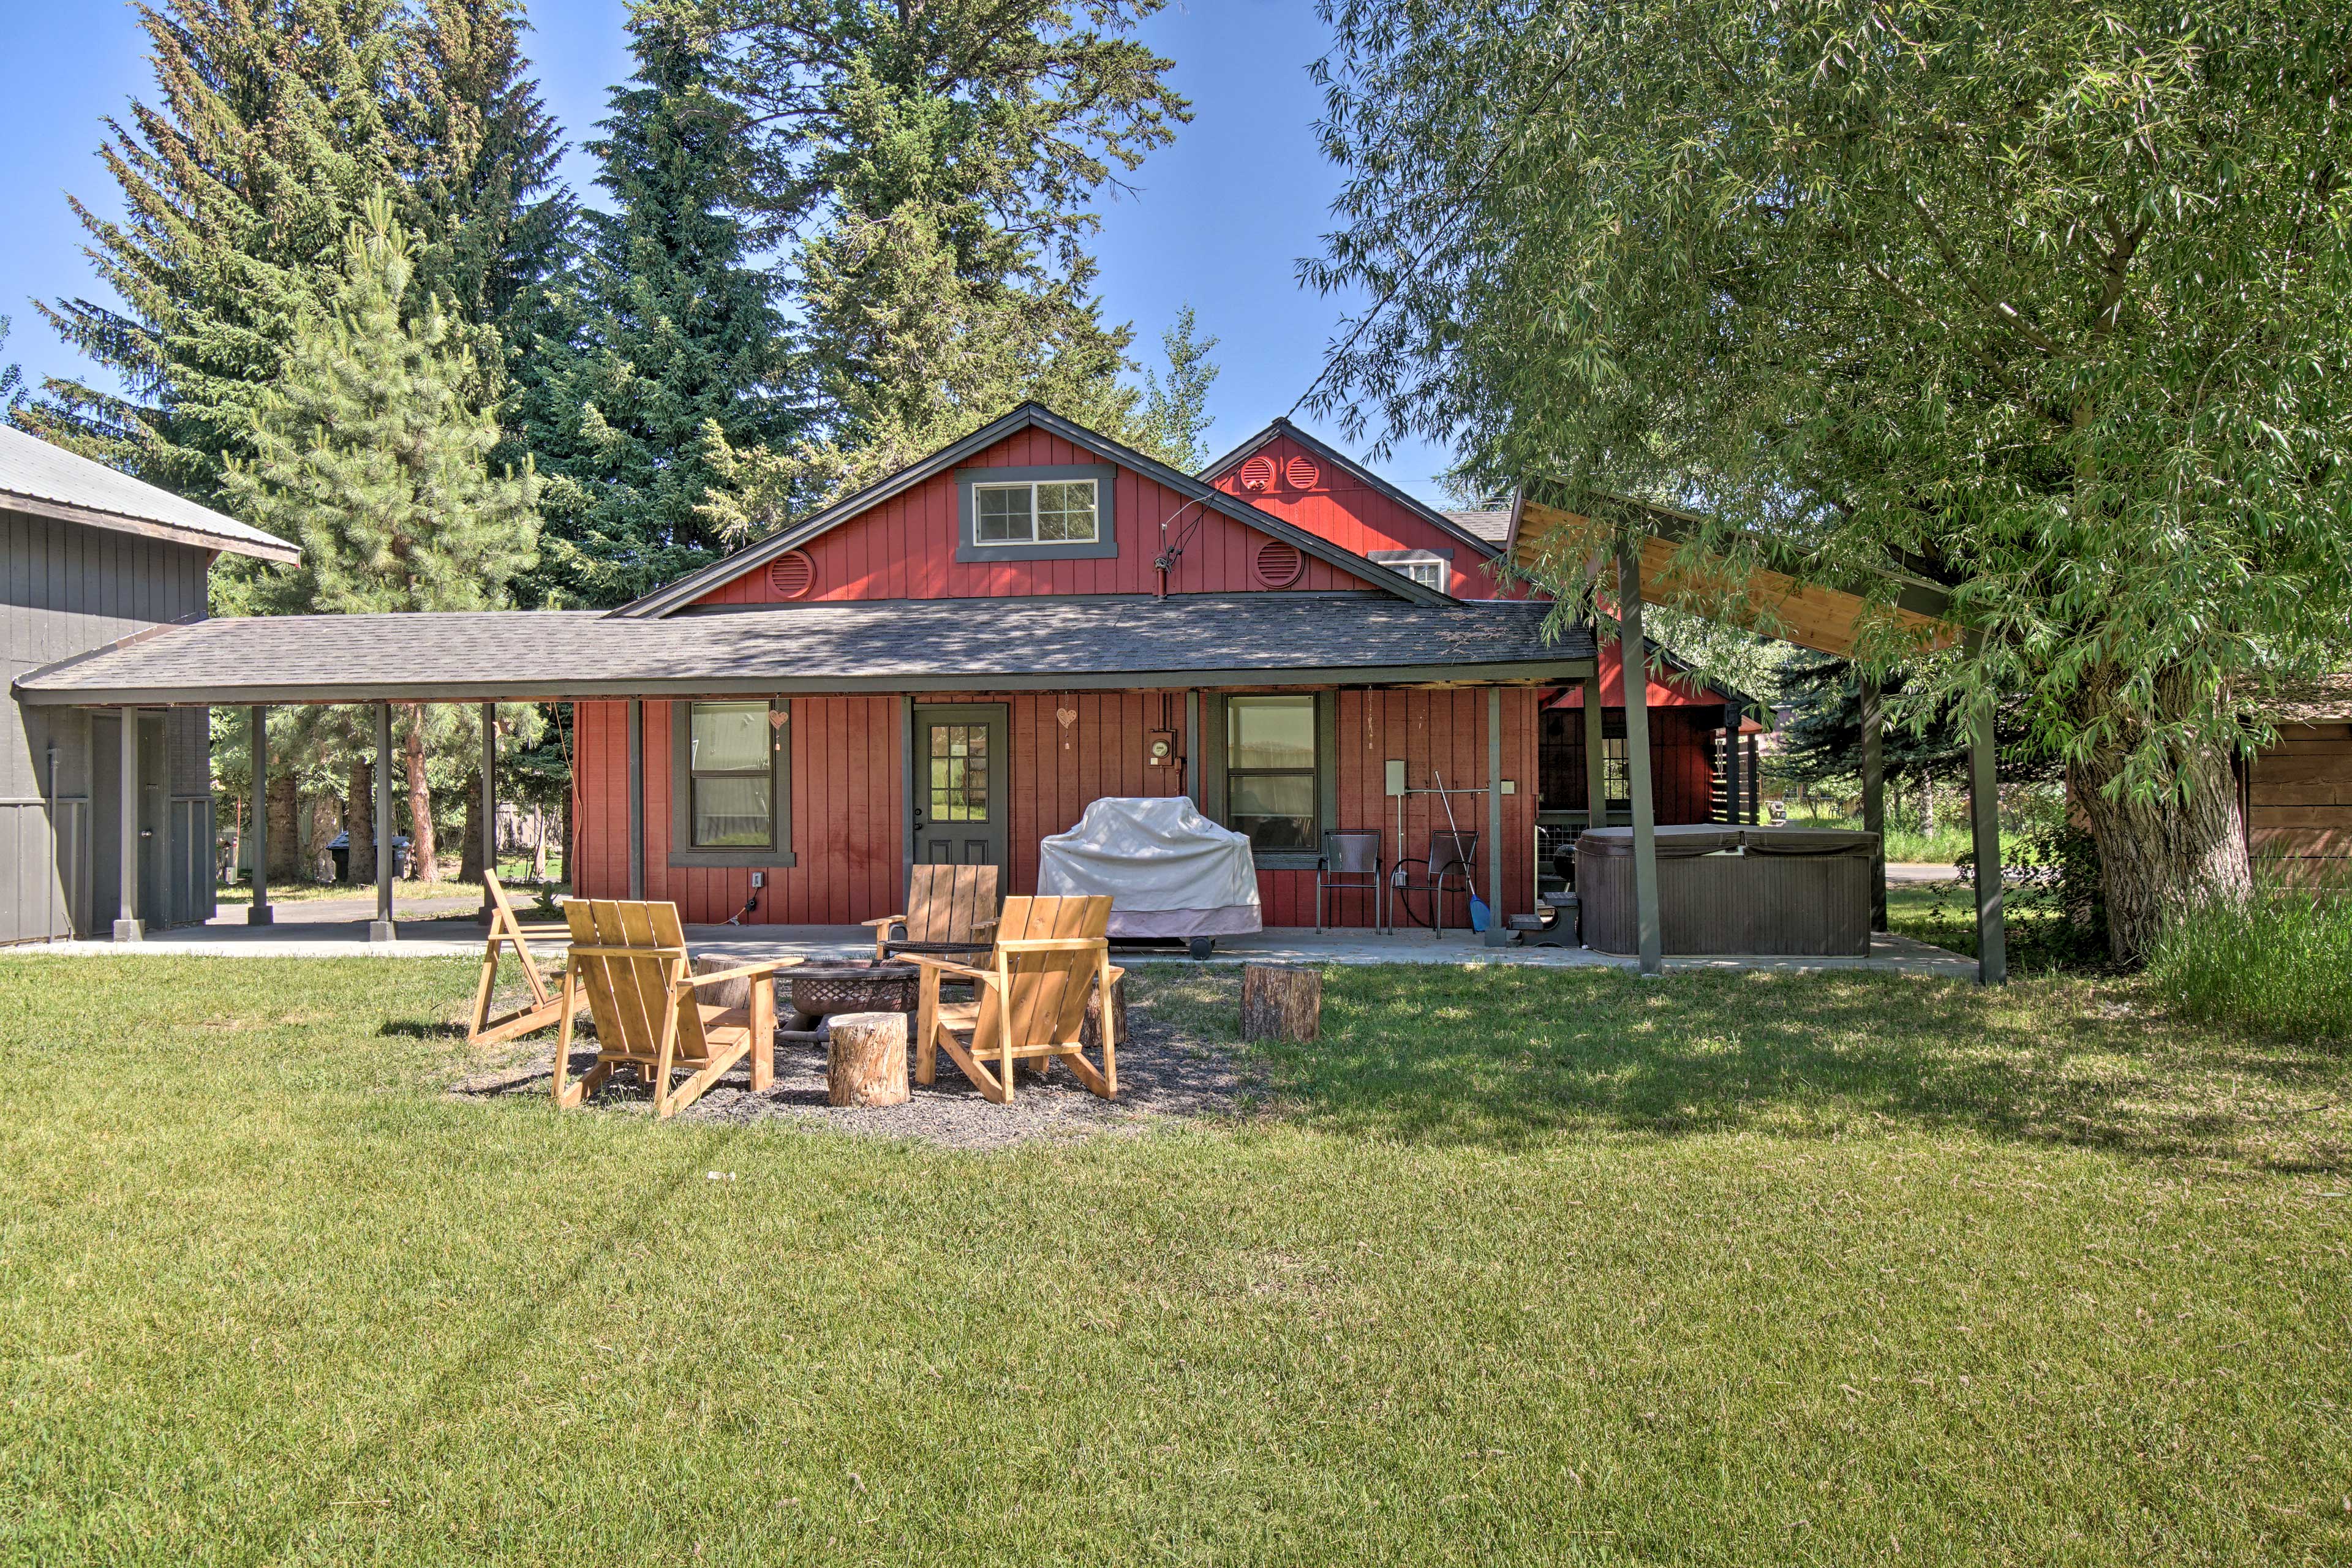 McCall Vacation Rental | 4BR | 4BA | Step-Free Access | 3,430 Sq Ft